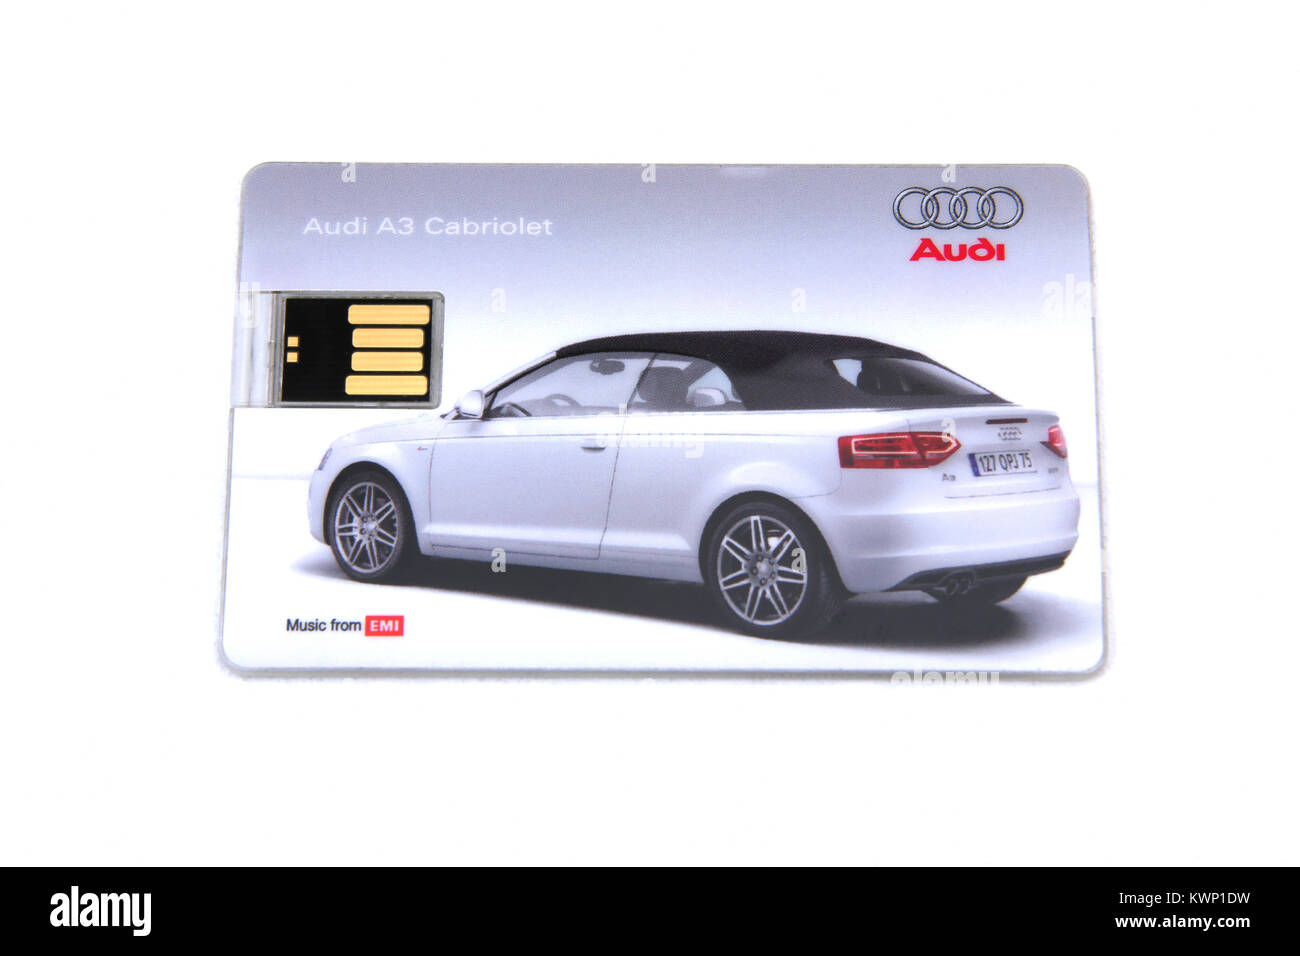 A Promotional USB Memory Card With Audi A3 Cabriolet Advert Stock Photo